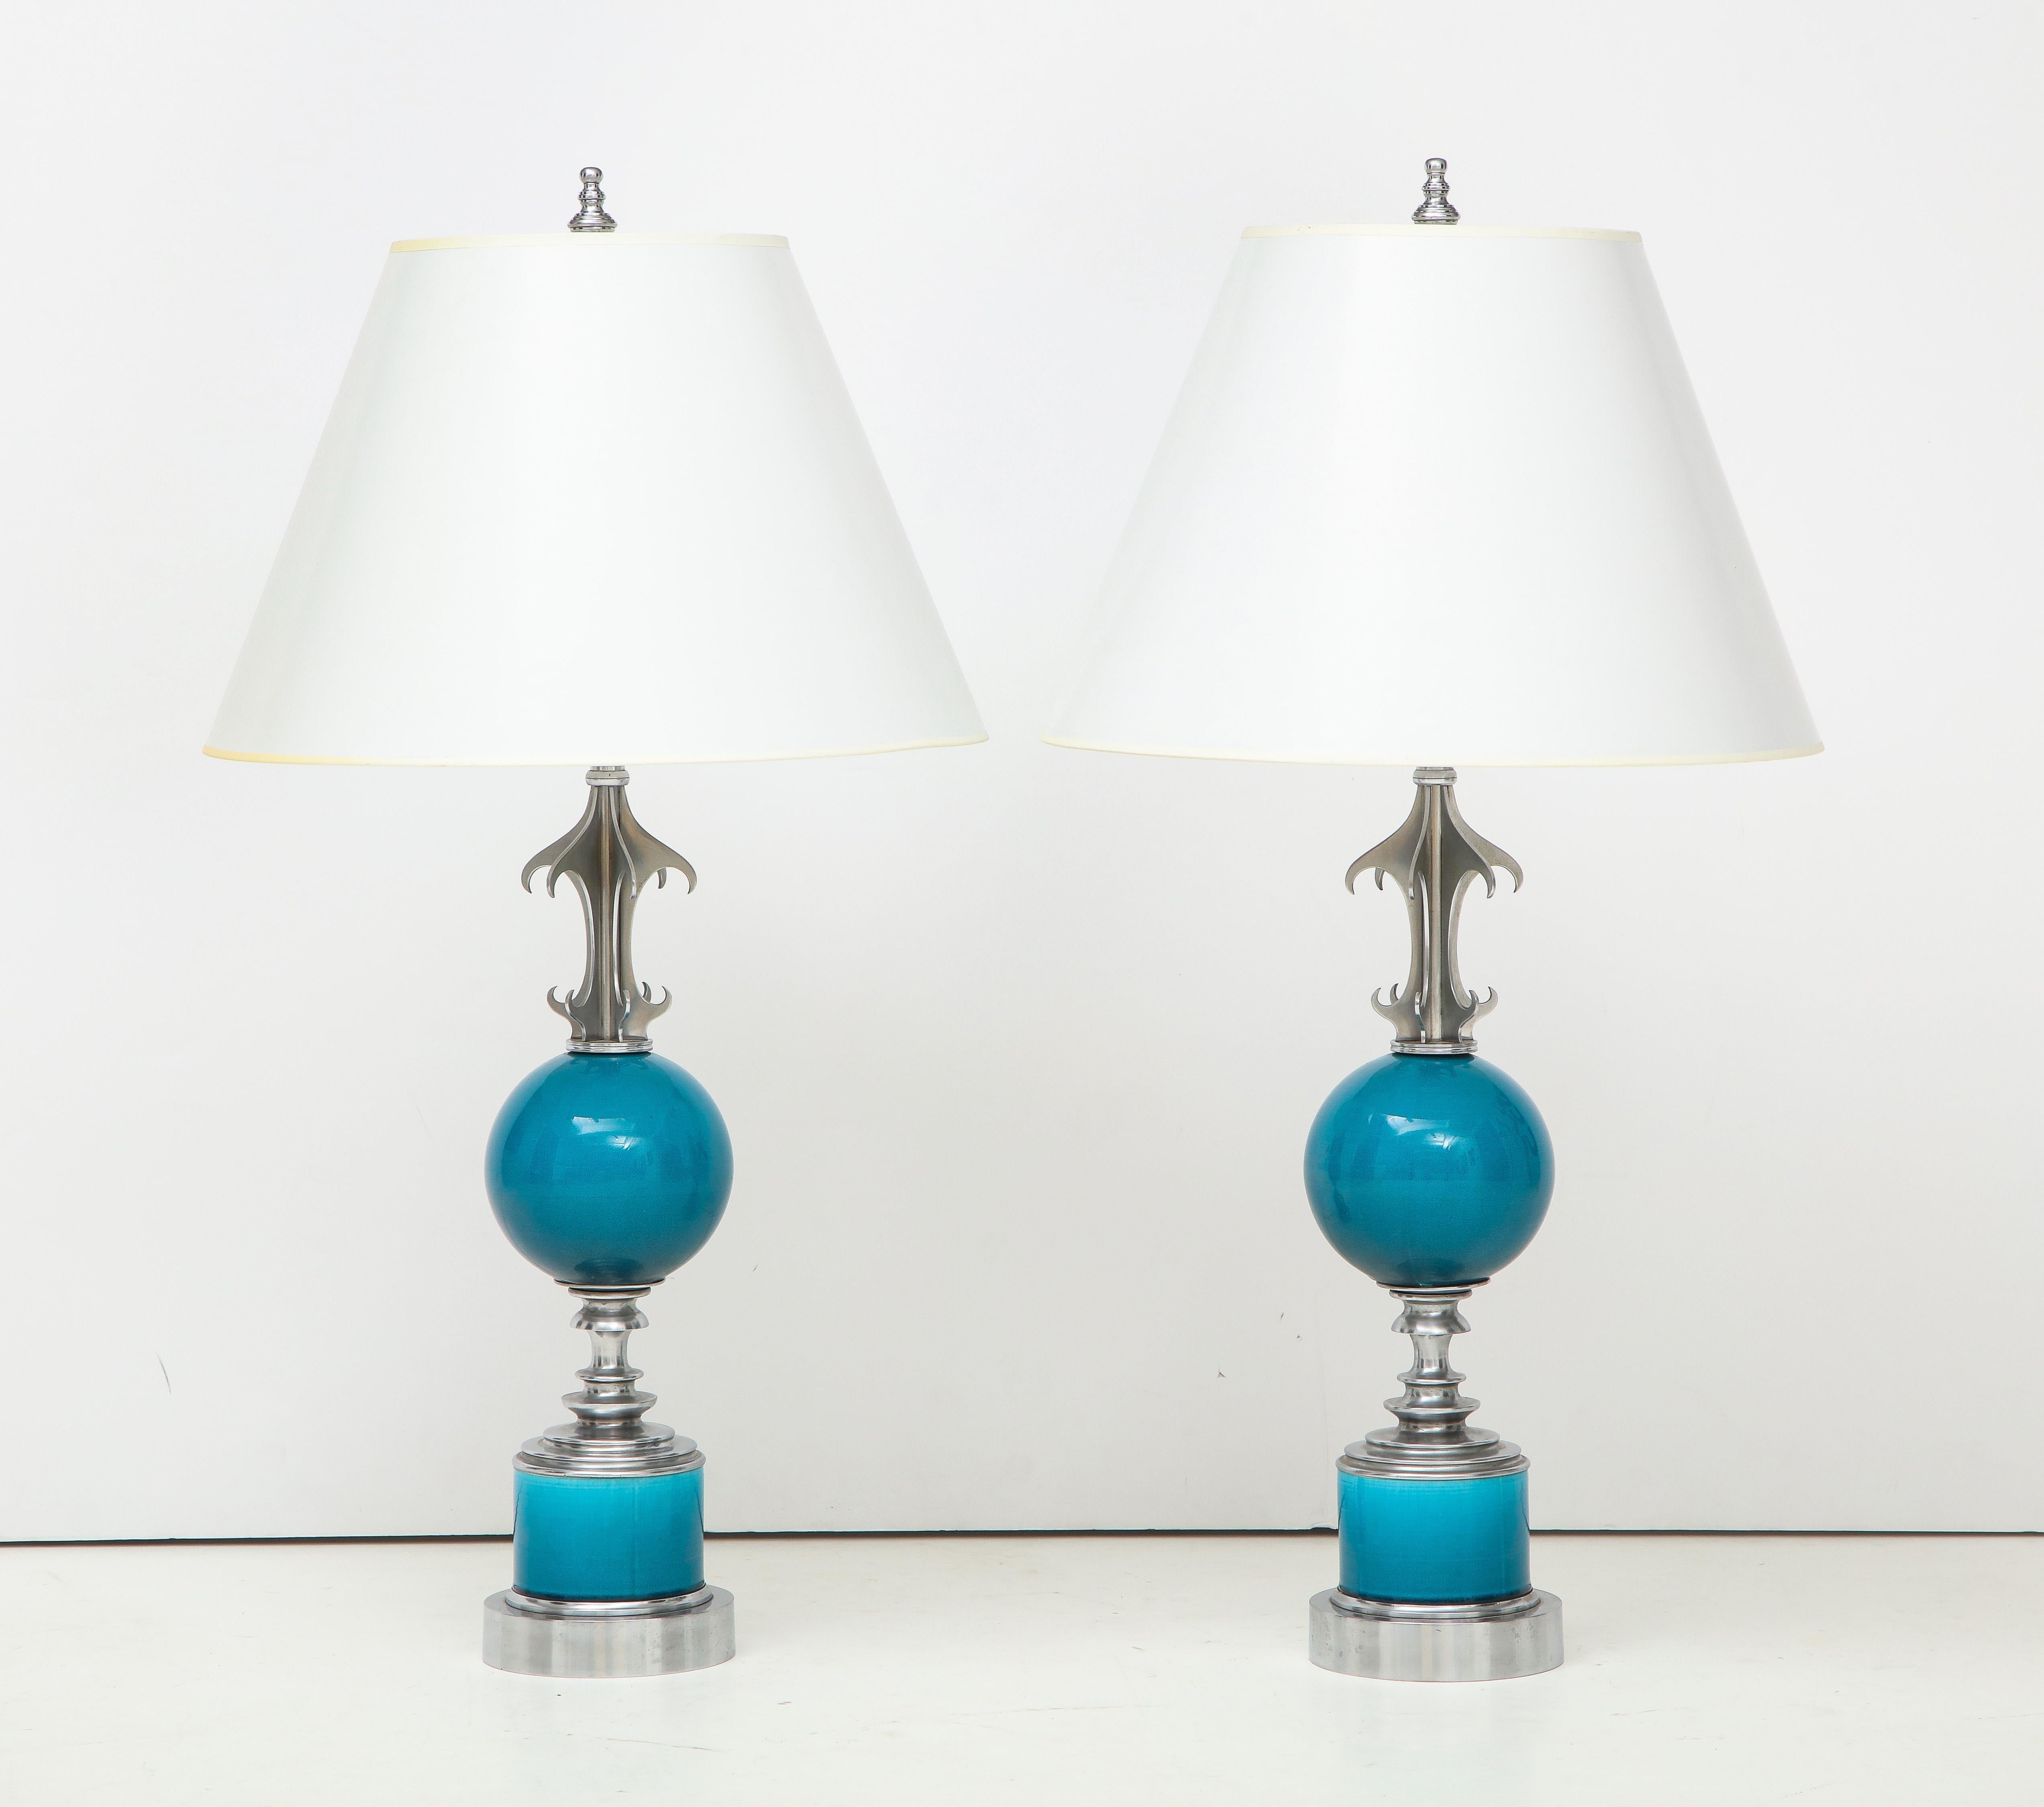 Pair of Blue Ceramic and Nickel-Plated Metal Table Lamps For Sale 10